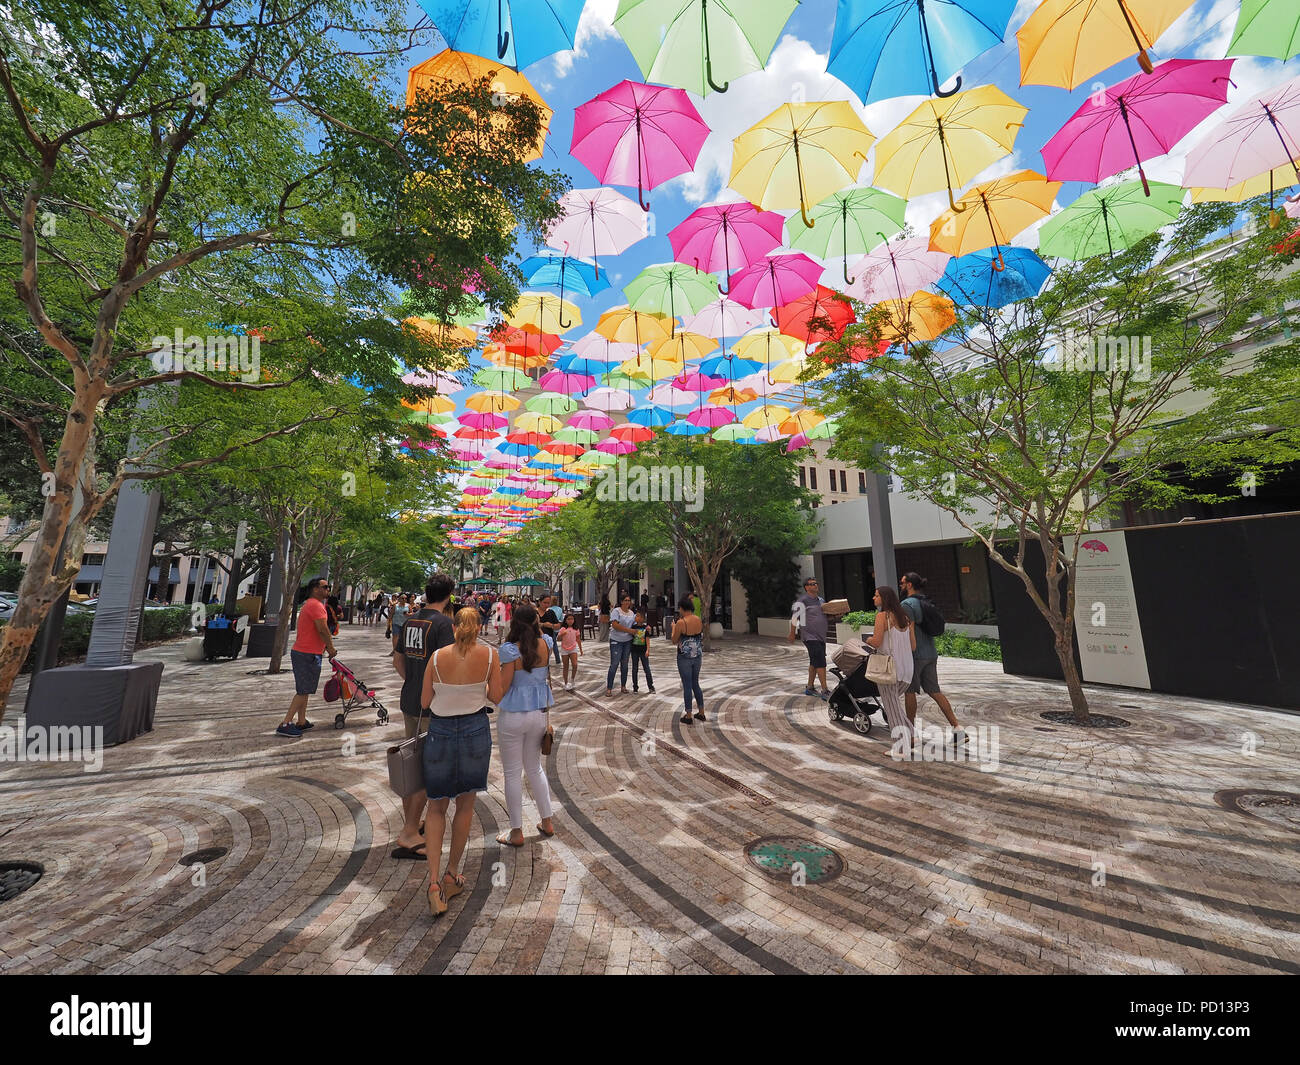 Umbrella Sky in Coral Gables, Florida, a joint art project by the City of Coral Gables and the Portuguese company Sextafeira. Stock Photo